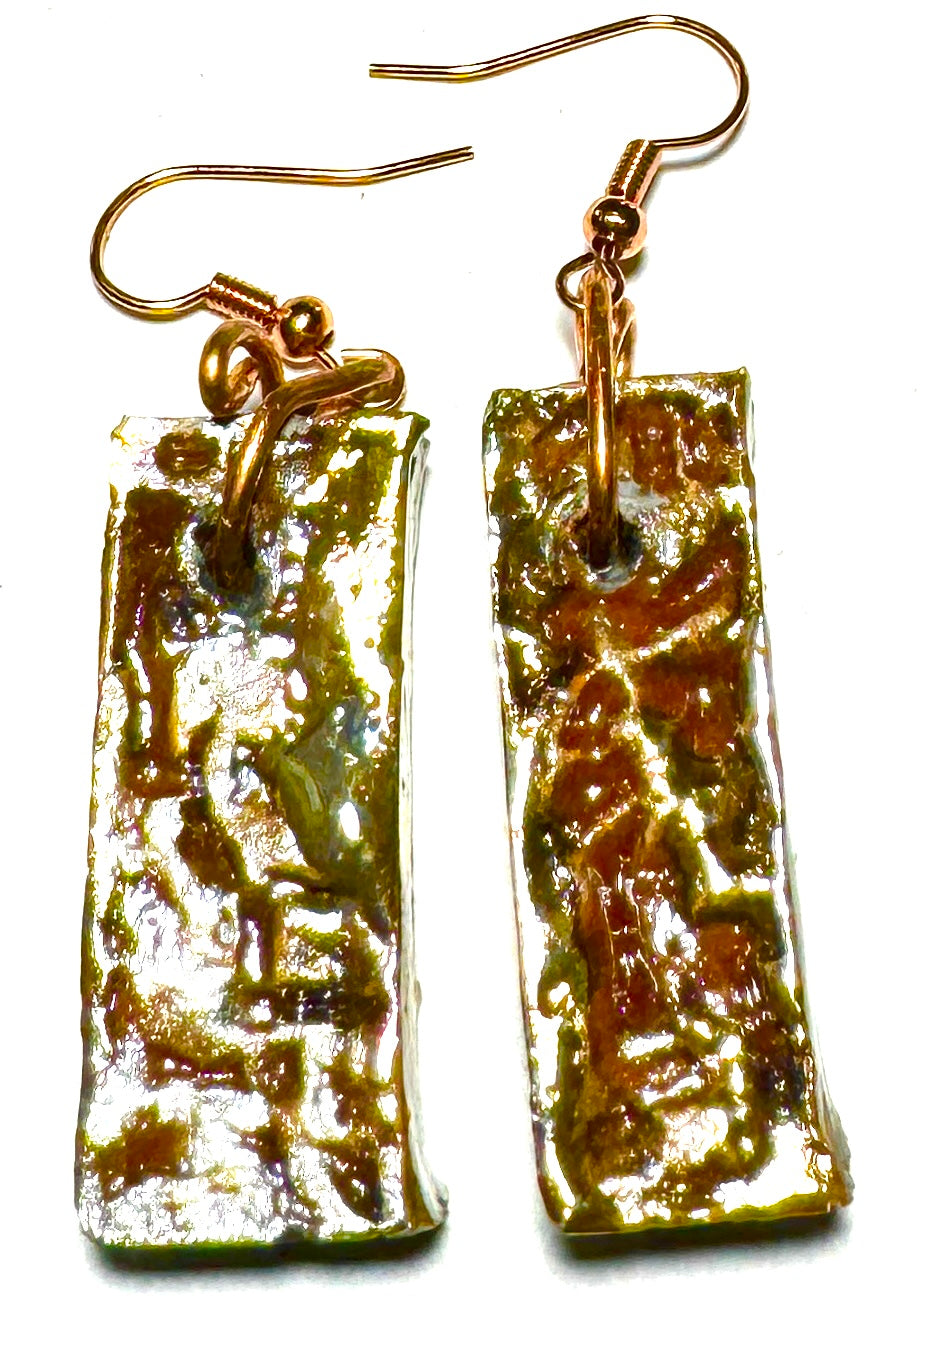 Take a daring fashion risk with the ER-15 earrings! These lightweight rectangle earrings feature a unique shimmery copper luster that adds an eye-catching sparkle to any look. Delicately crafted at 1/2 ounce, they're designed to go anywhere. Be bold and make a statement!